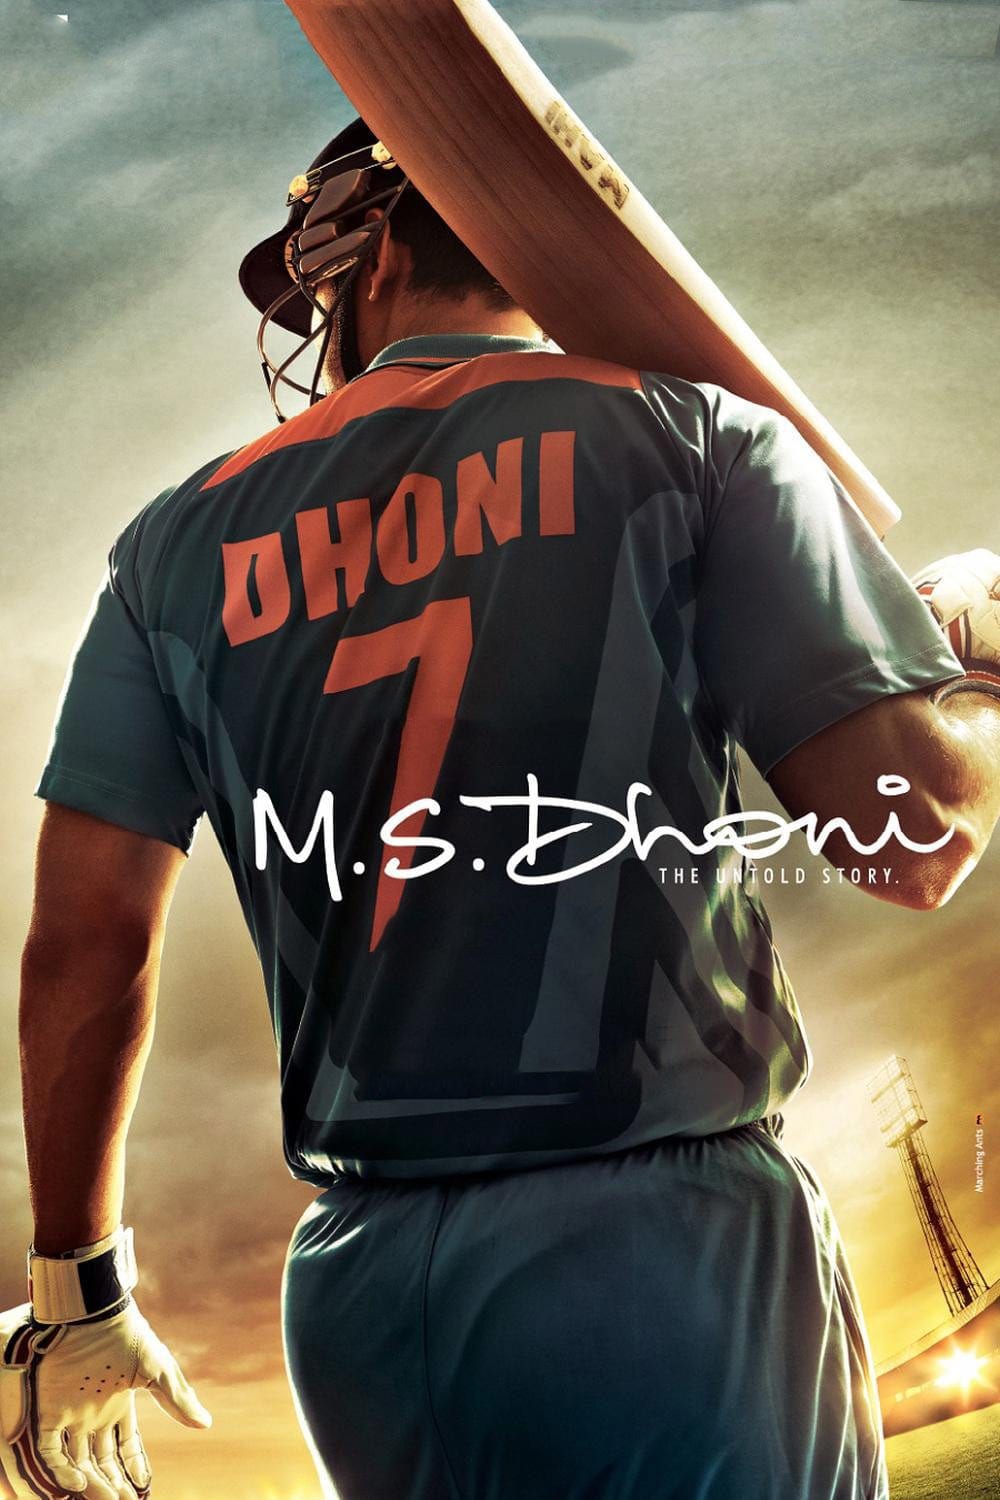 Poster for the movie "M.S. Dhoni: The Untold Story"